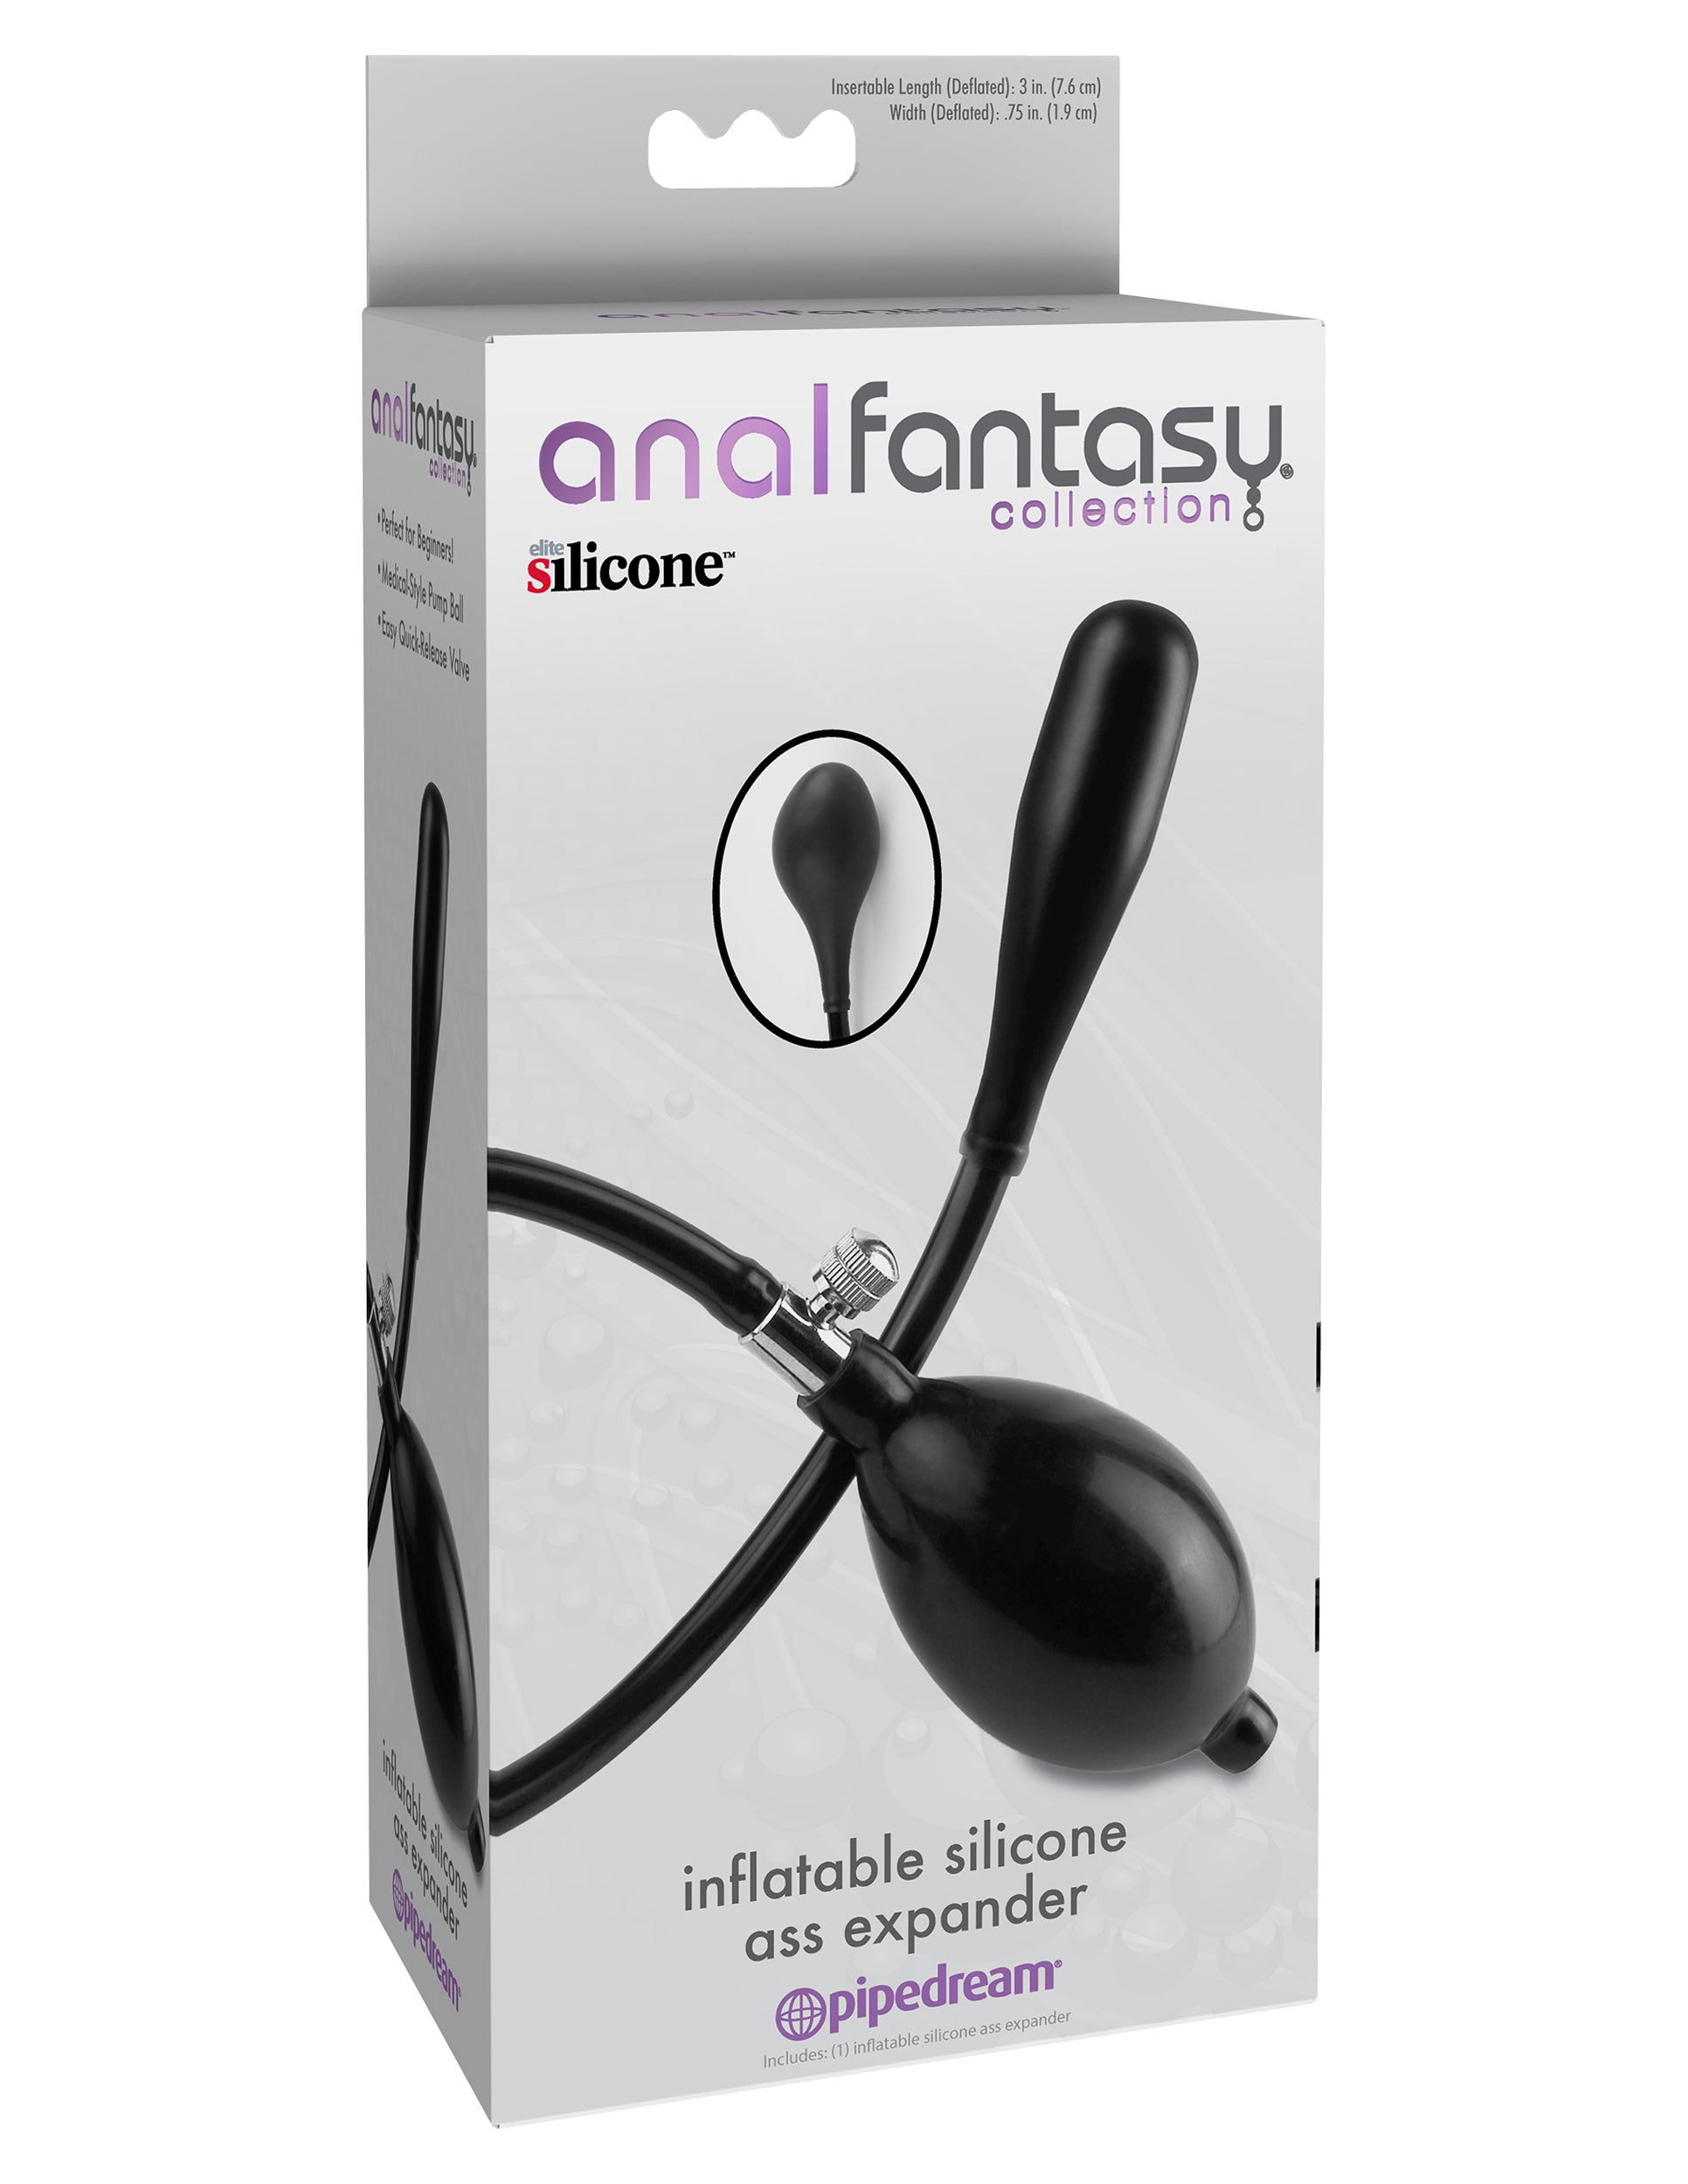 Anal Fantasy Collection Inflatable Silicone Ass Expander - Black-2